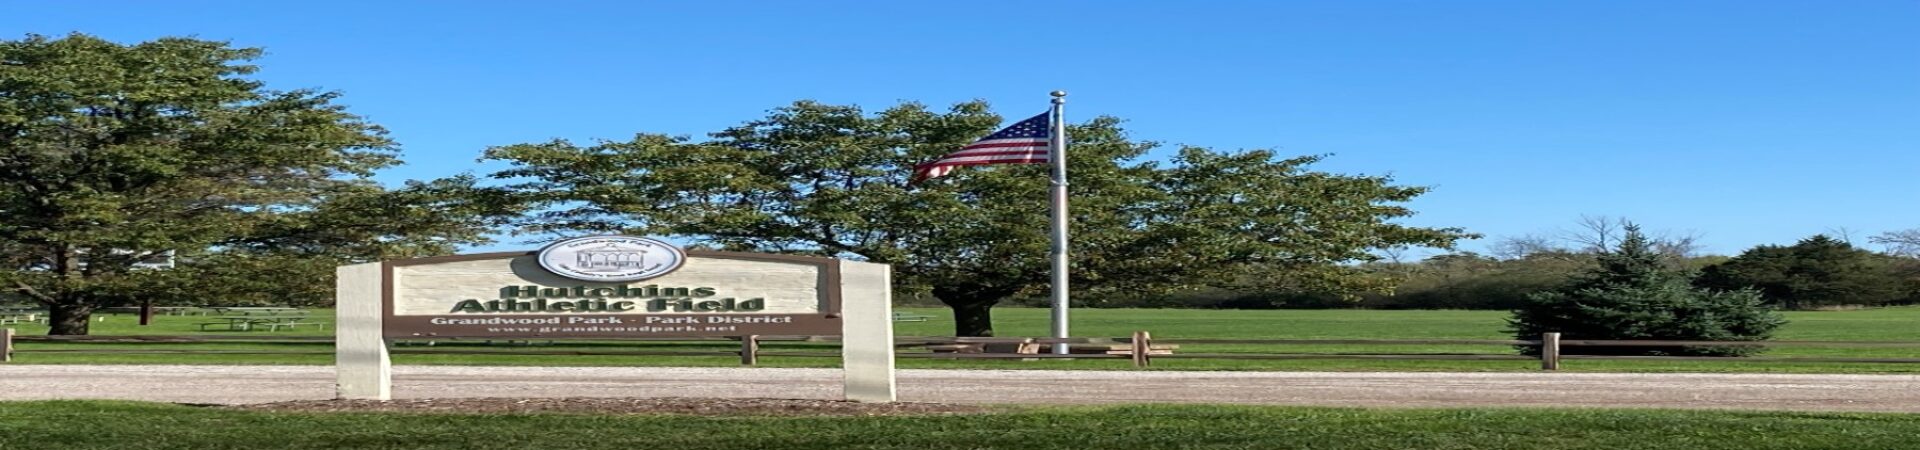 picture of a field with a white and brown park district sign and a flagpole and trees and bushes